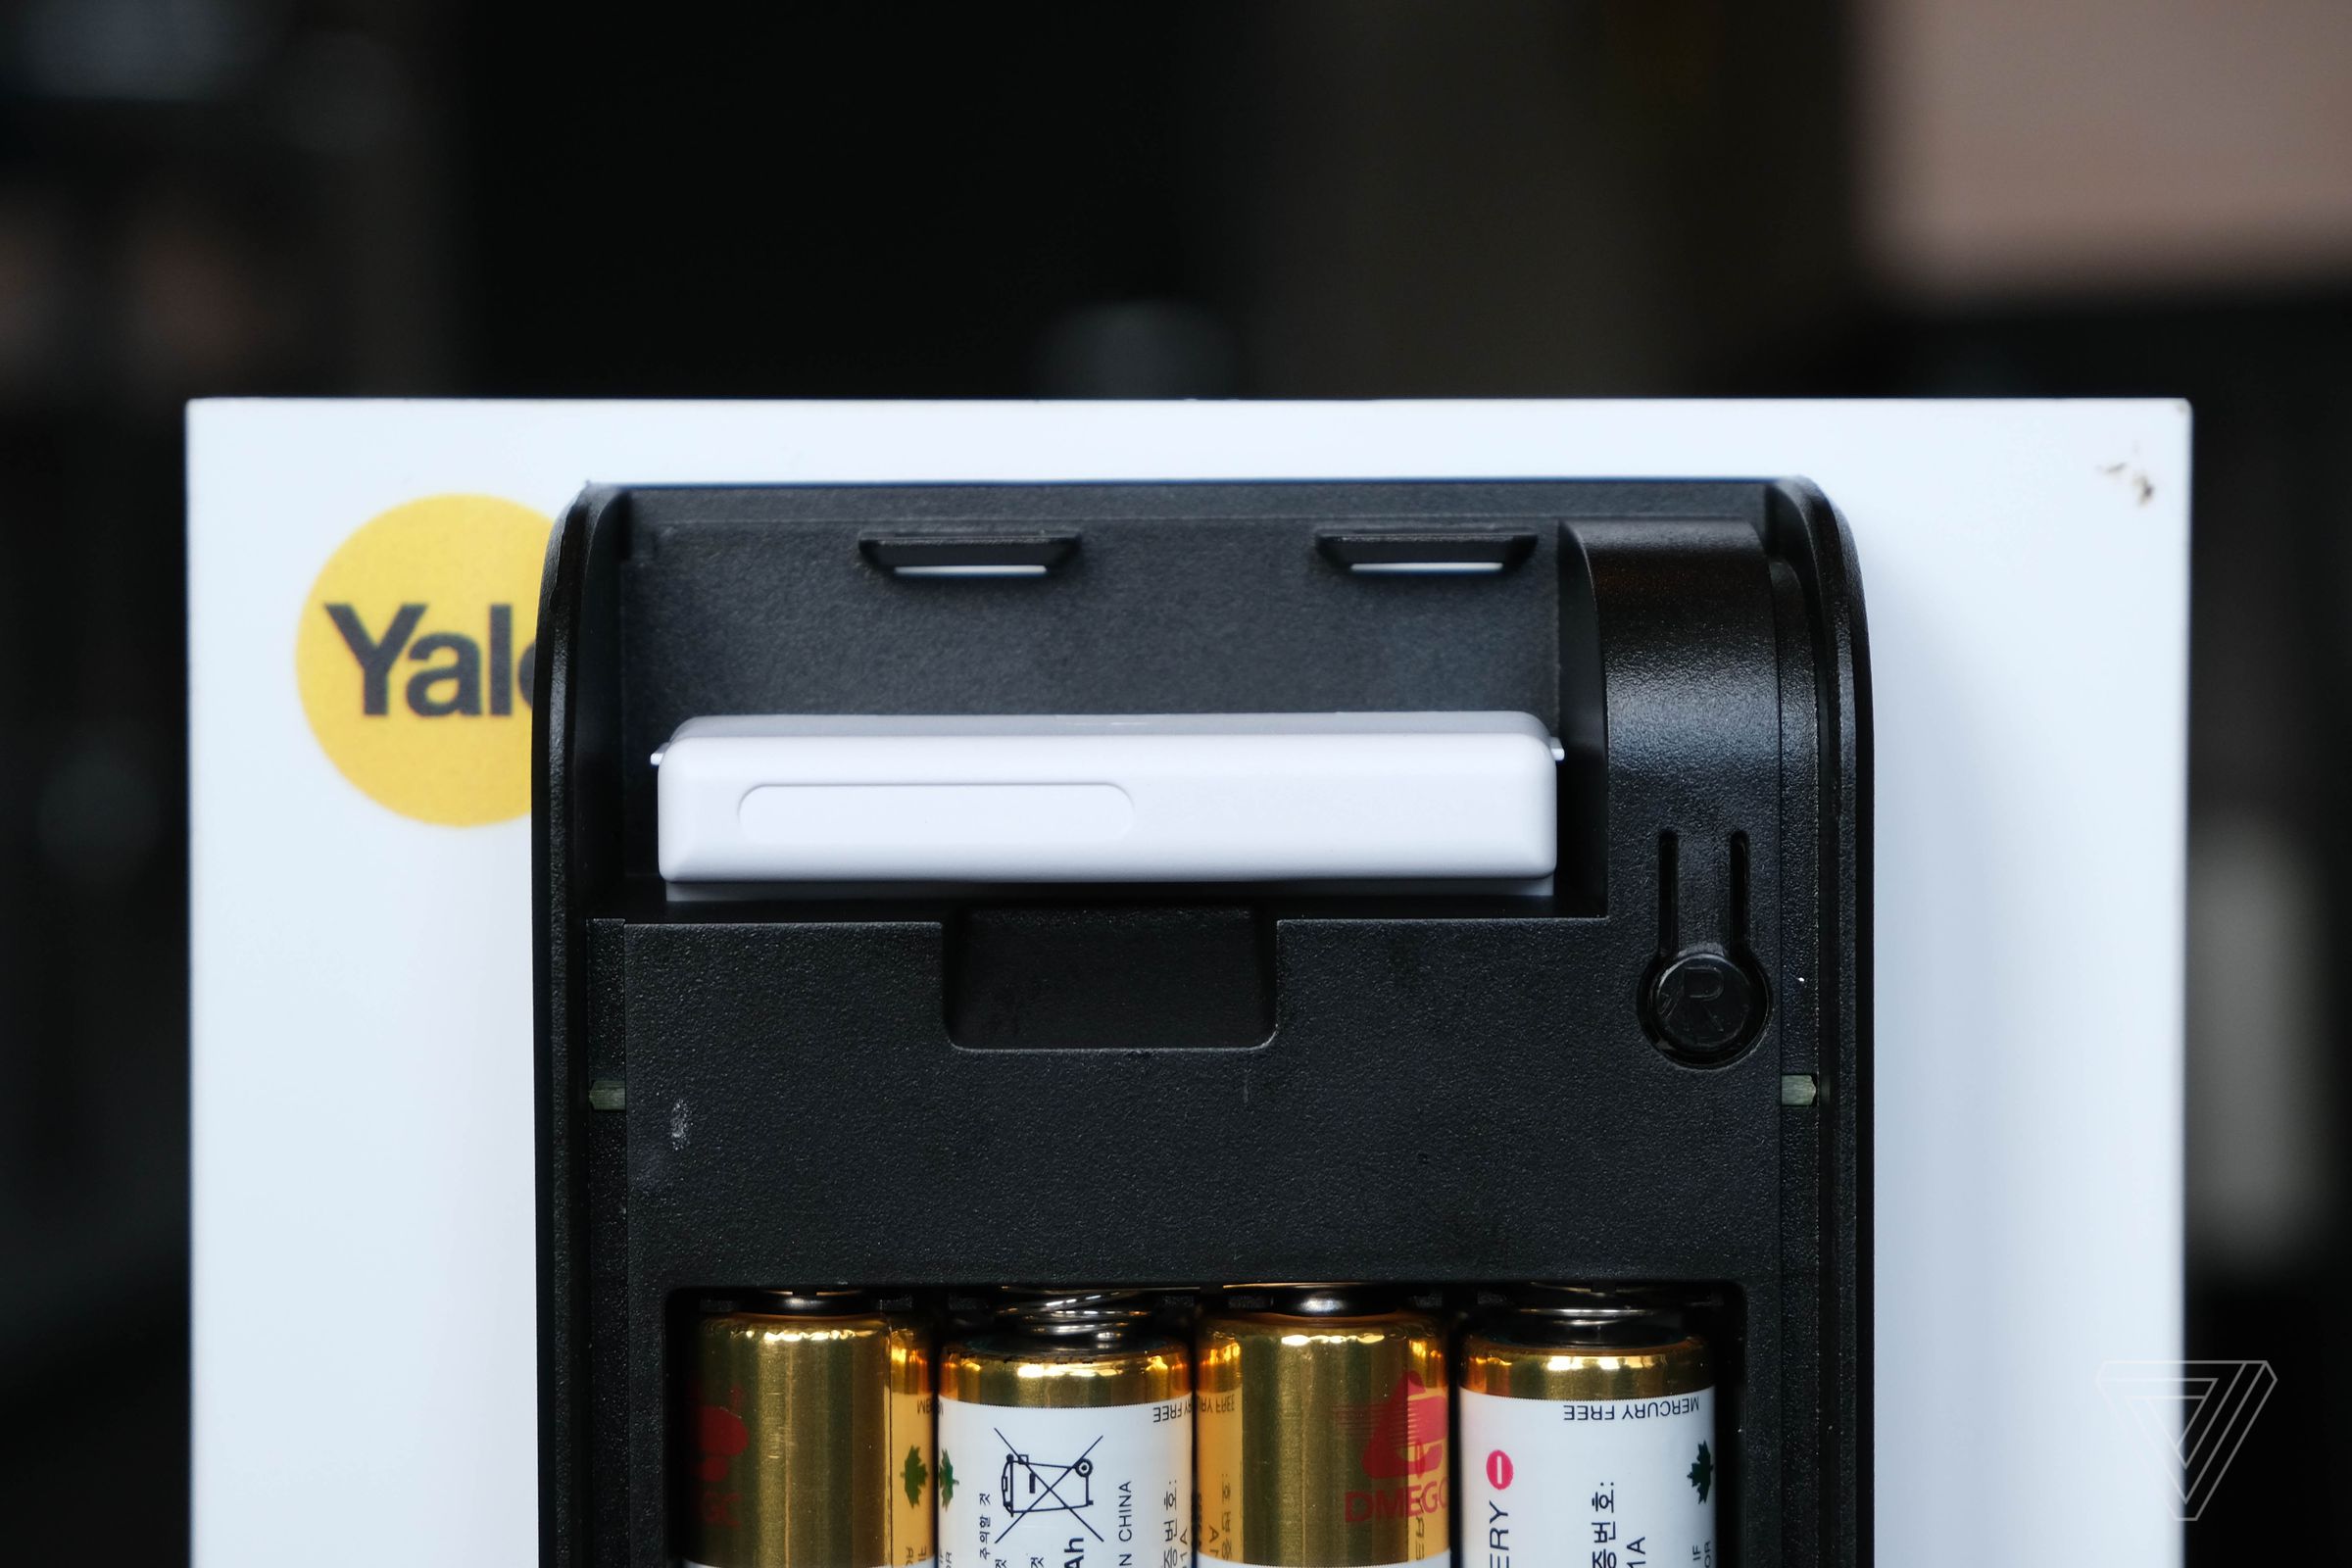 The module plugs into the battery compartment of the Yale smart lock.